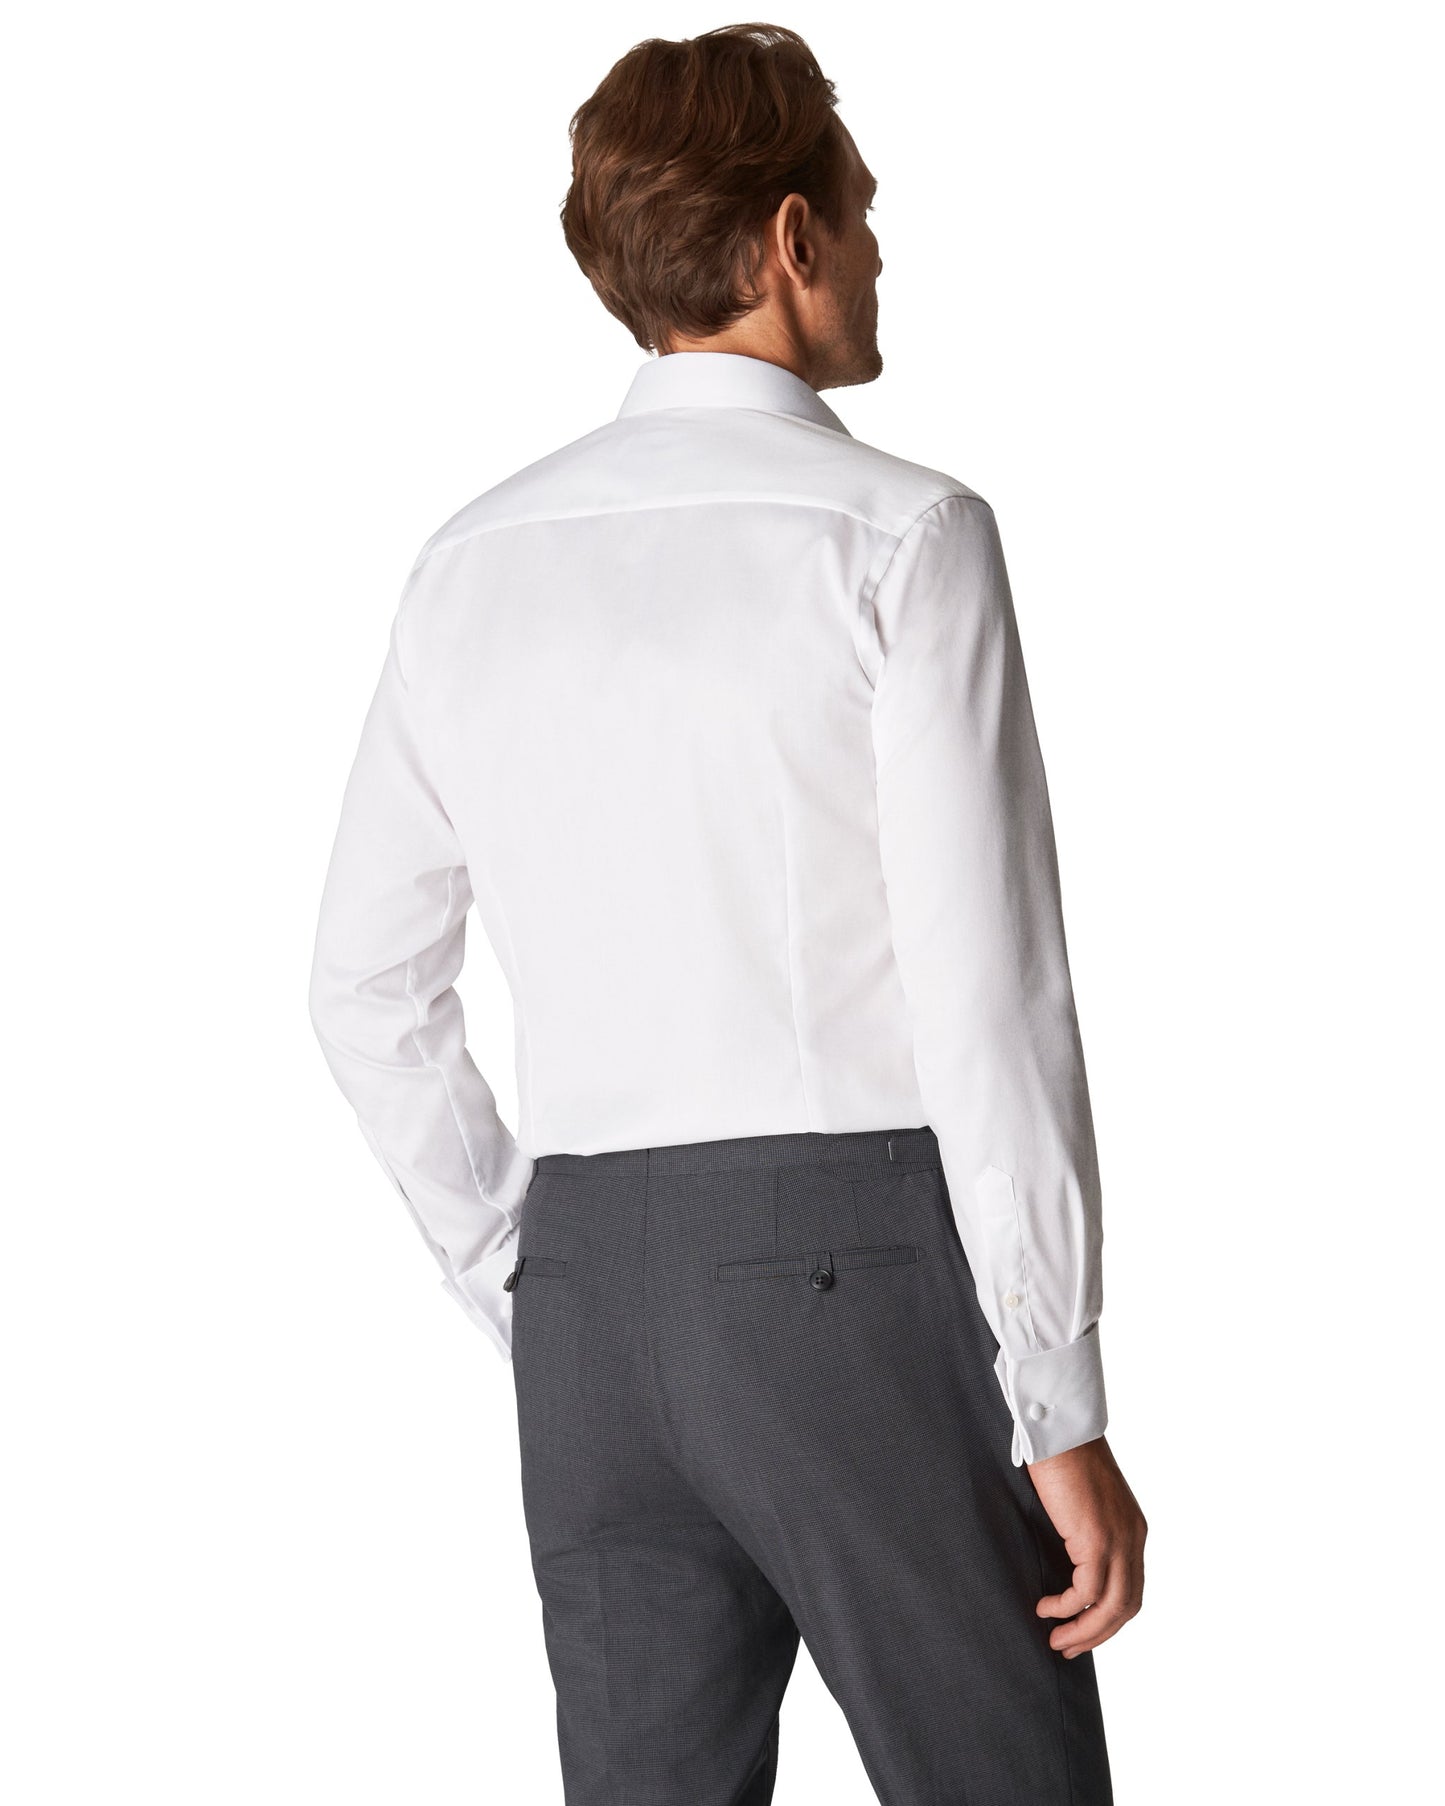 Eton L/S Business Shirt - Signature Twill in Contemporary Fit with French Cuffs